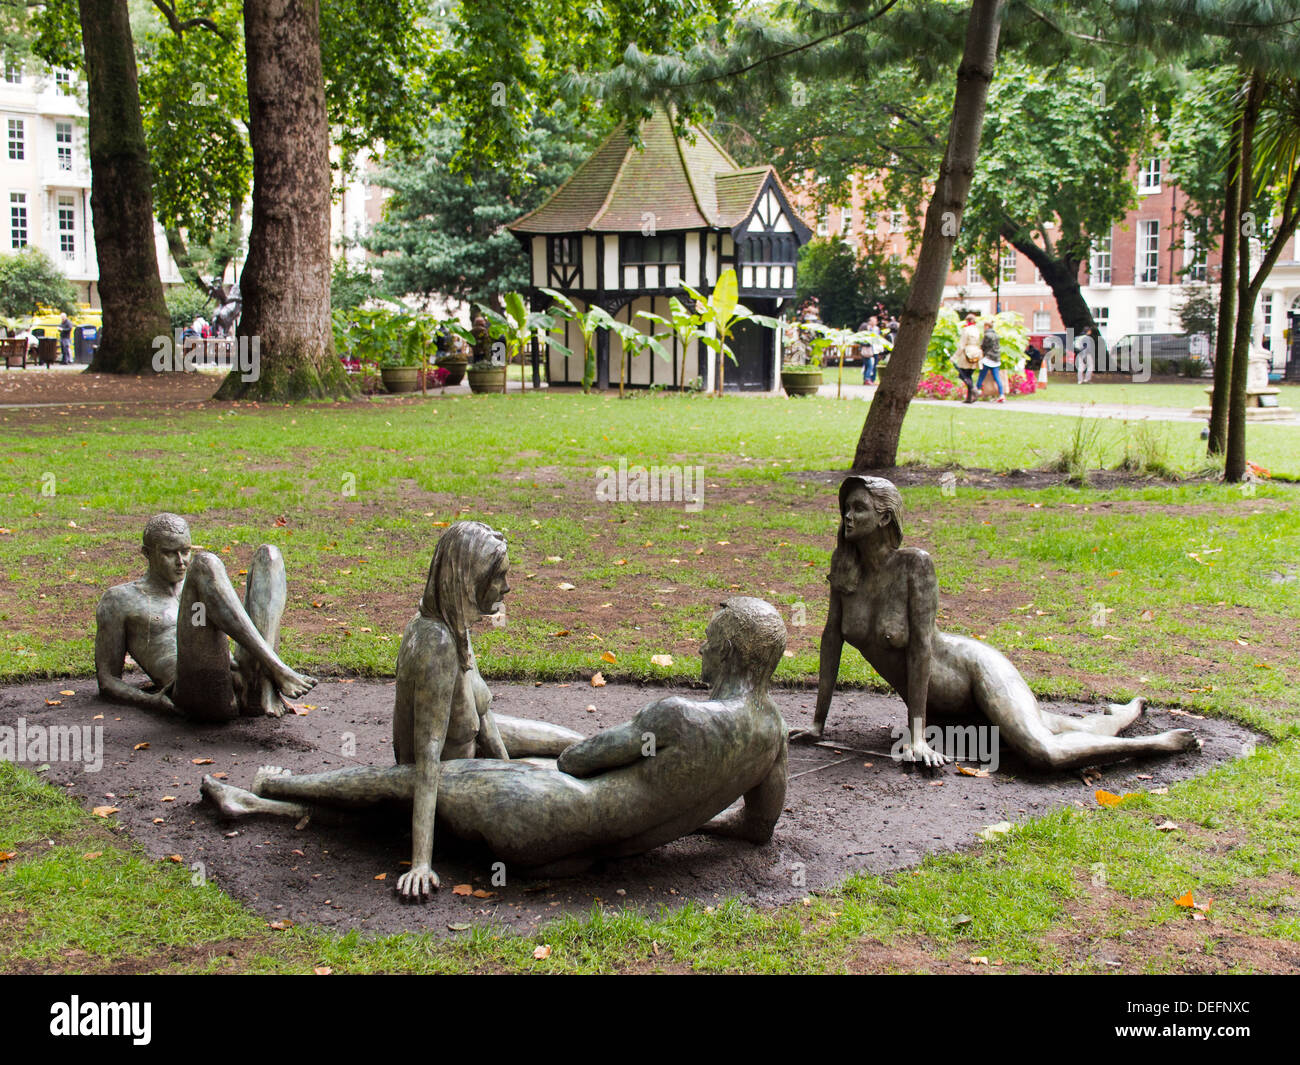 Sculpted group of figures by Bruce Denny in Soho Square, London 2 Stock Photo